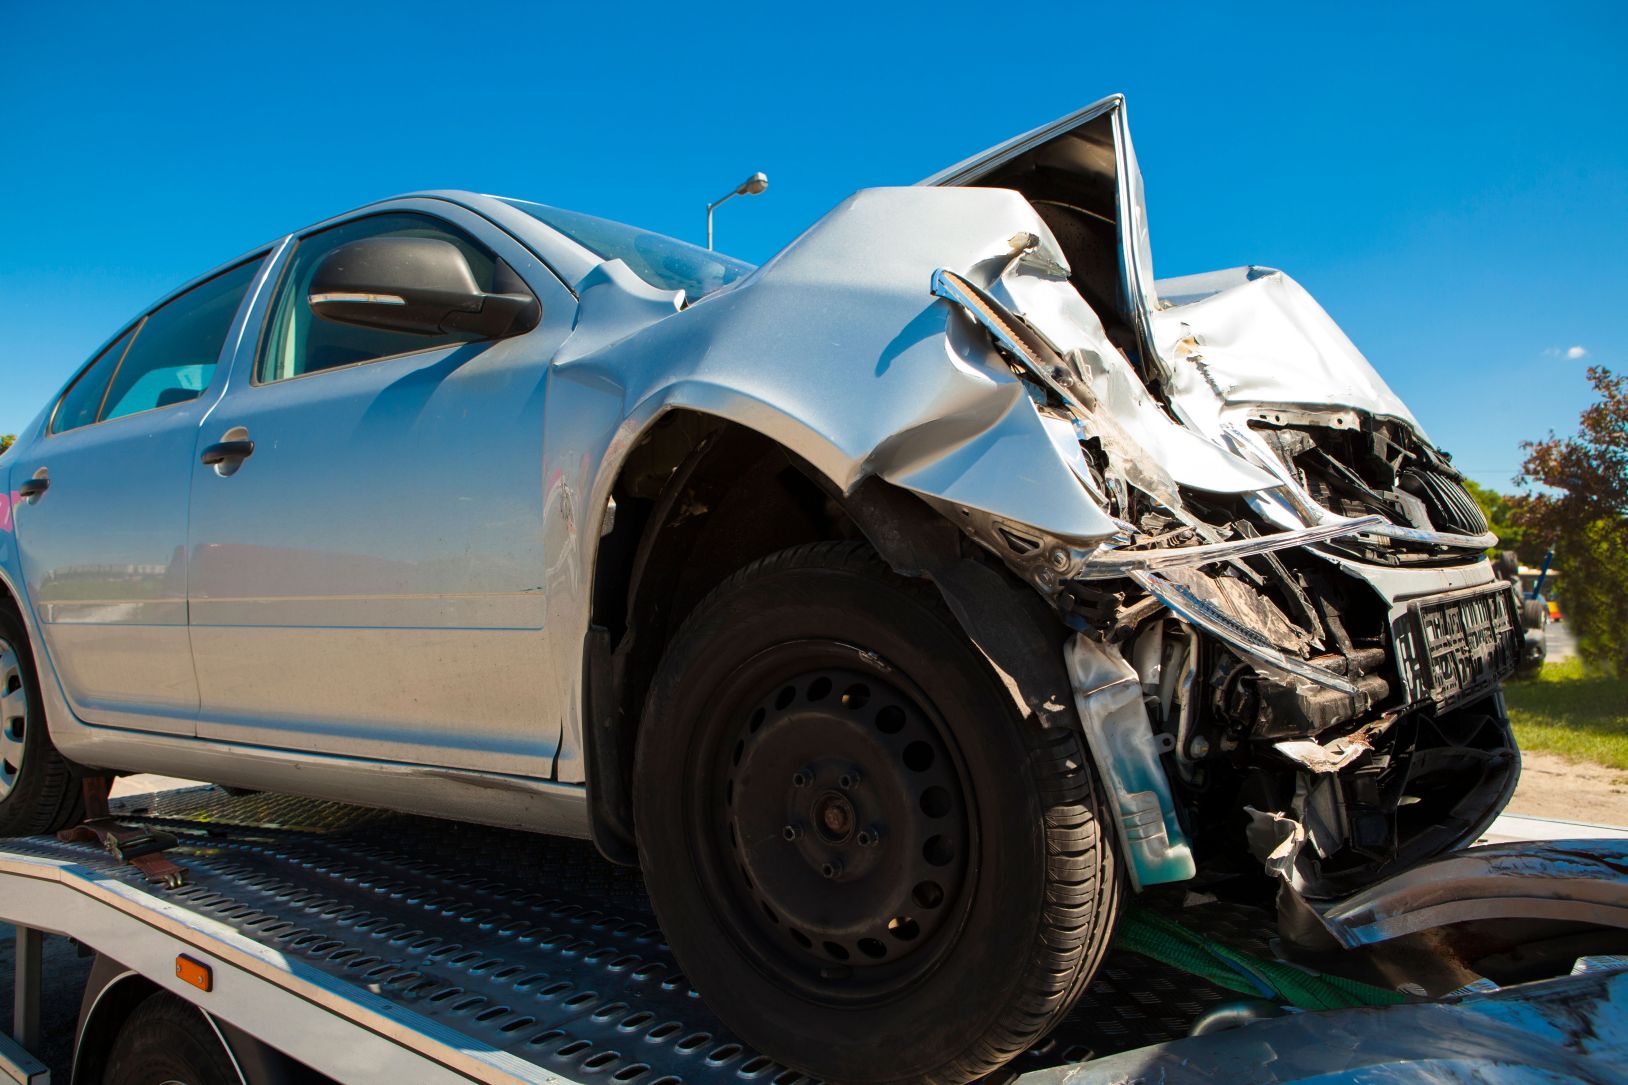 How Long Do You Have to File a Police Report After a Car Accident in Nevada?